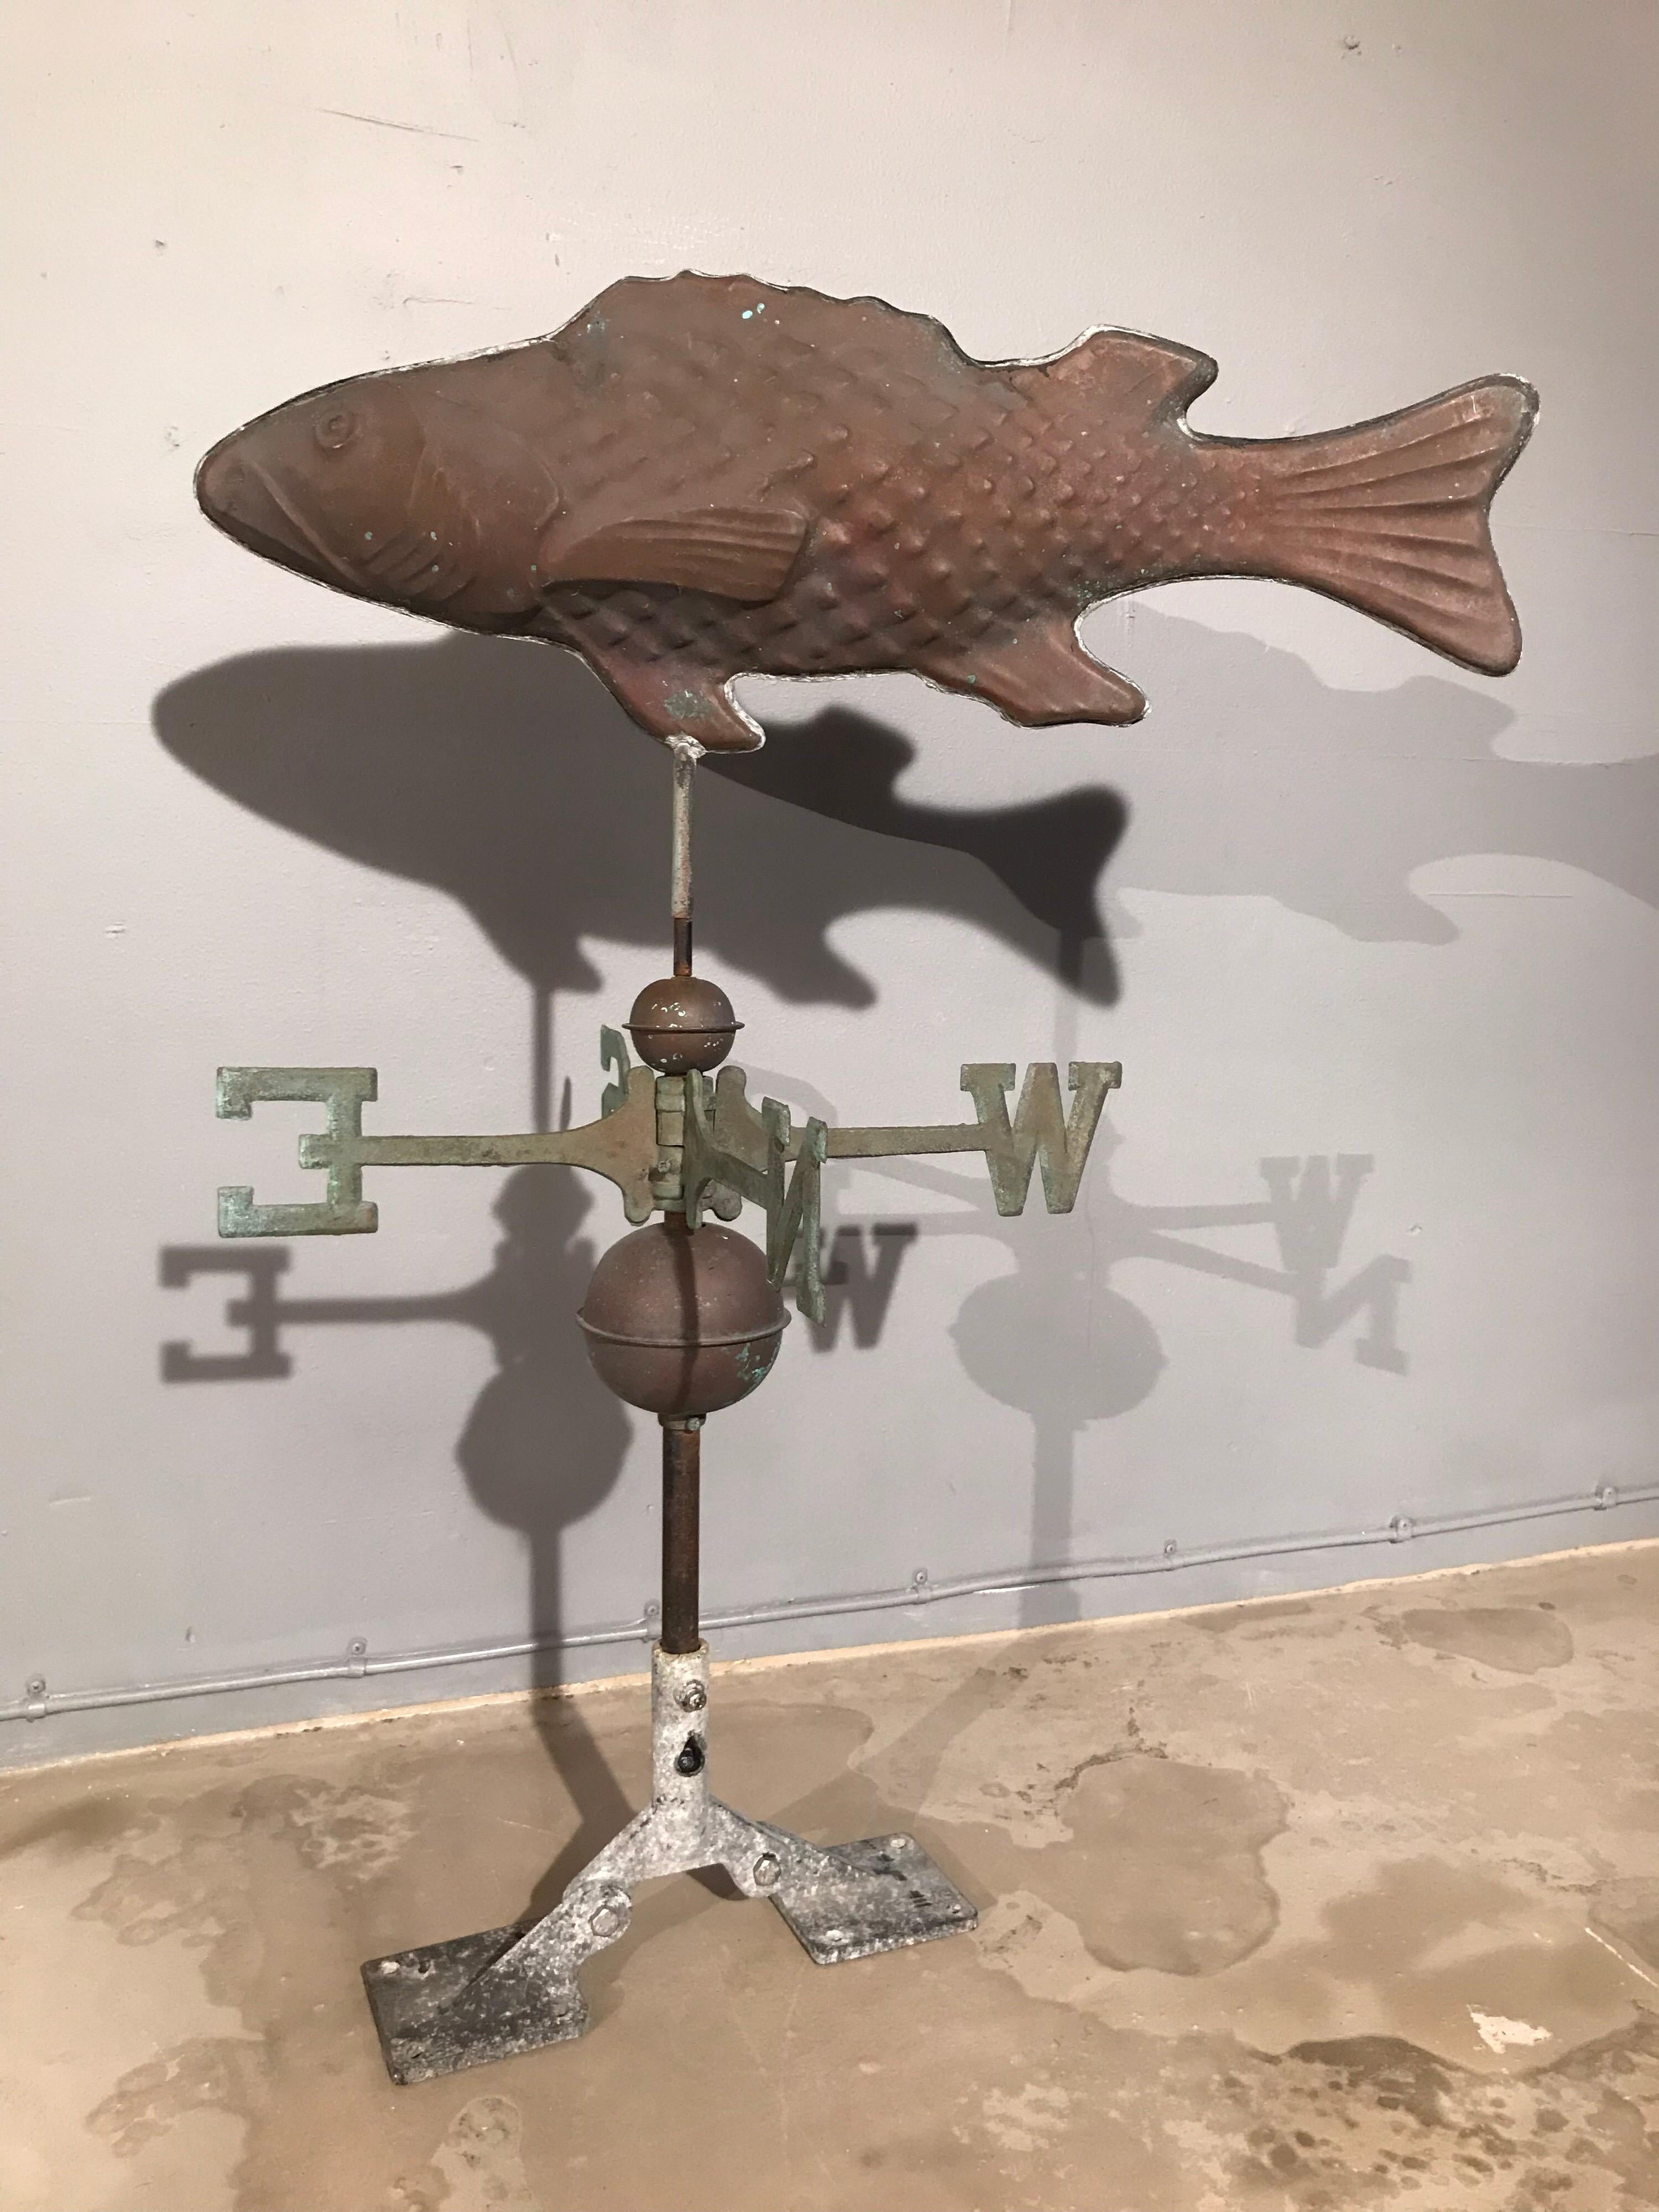 Vintage fish weathervane in copper and steel.
Lovely patina to the surfaces
Copper pressed revolving fish resembles a salmon and is mounted onto a steel rod
The N S E W letters are also copper as are the two globes.
Ready to mount.
 